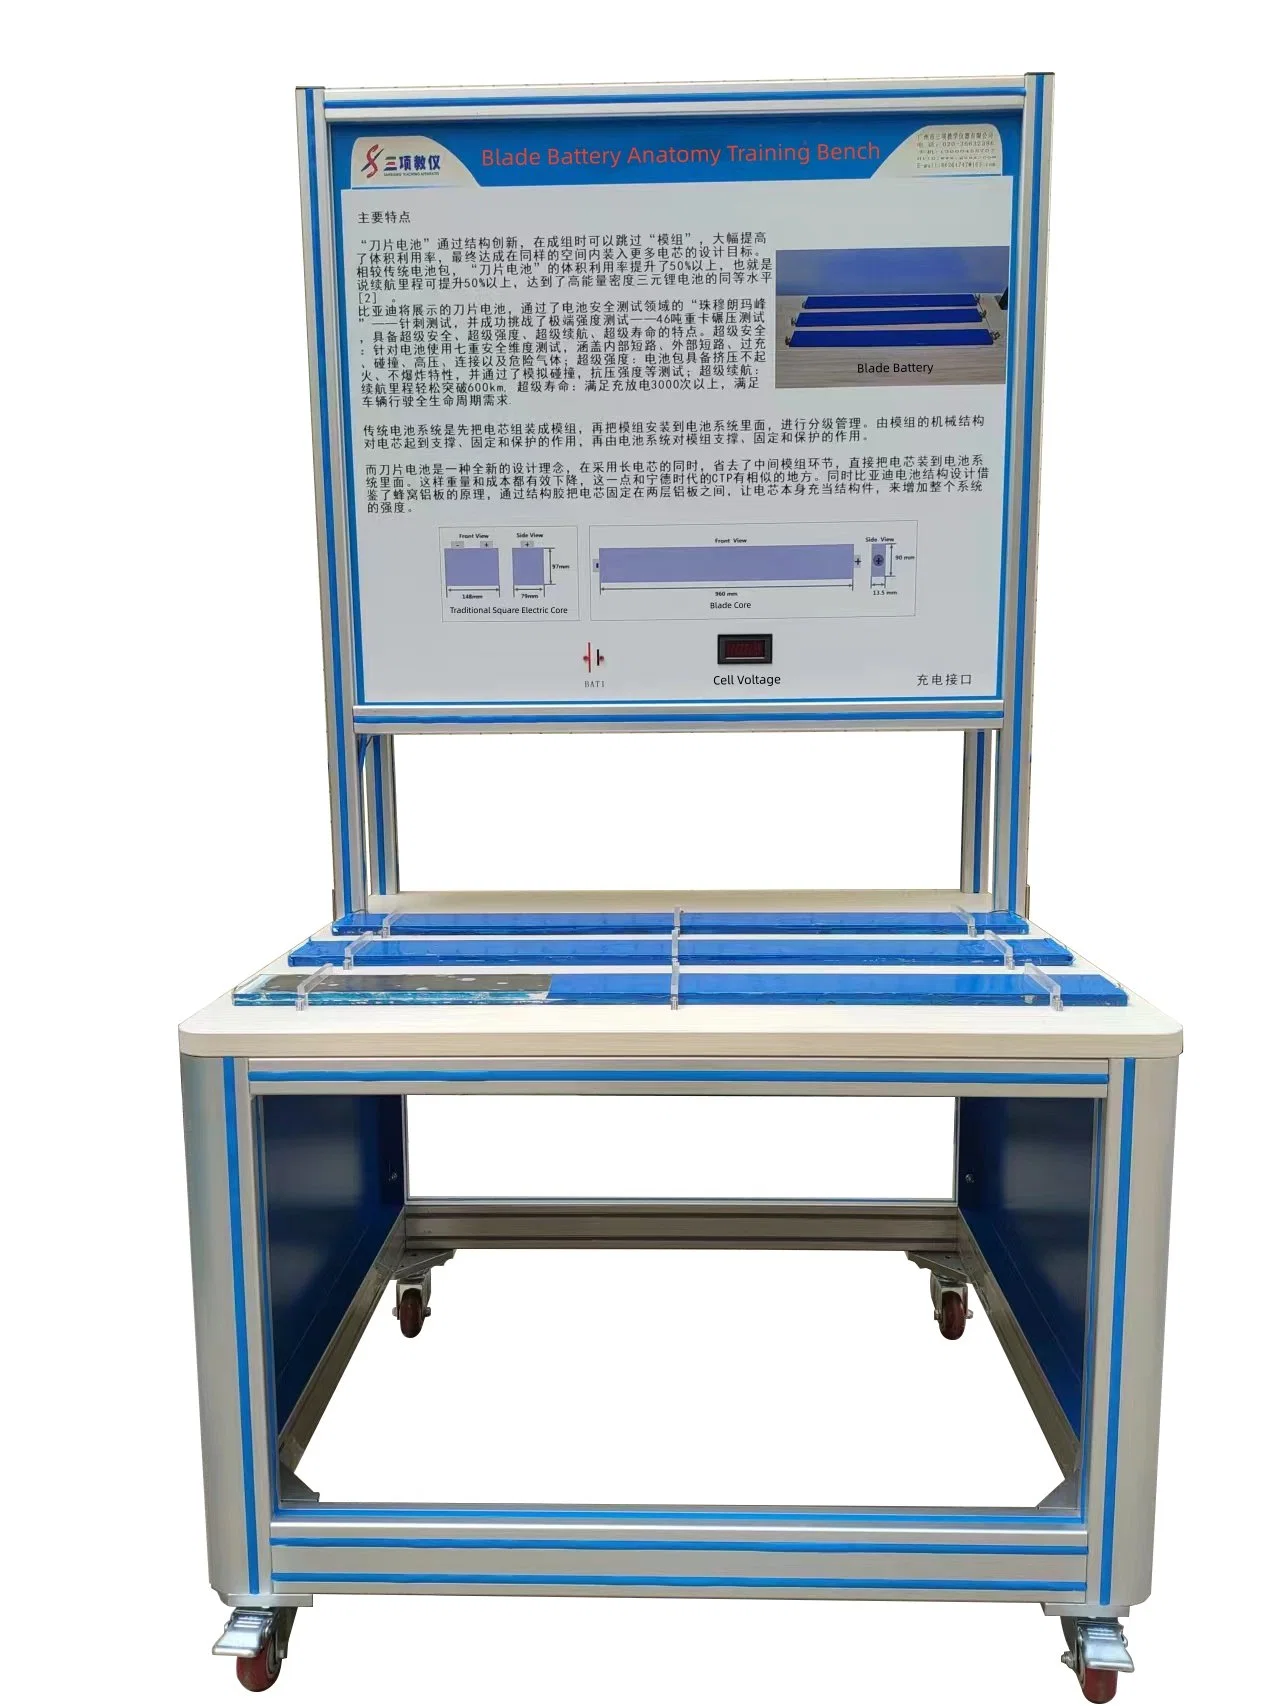 Blade Battery Dissection Training Bench Automotive Vocational Training Educational Equipment